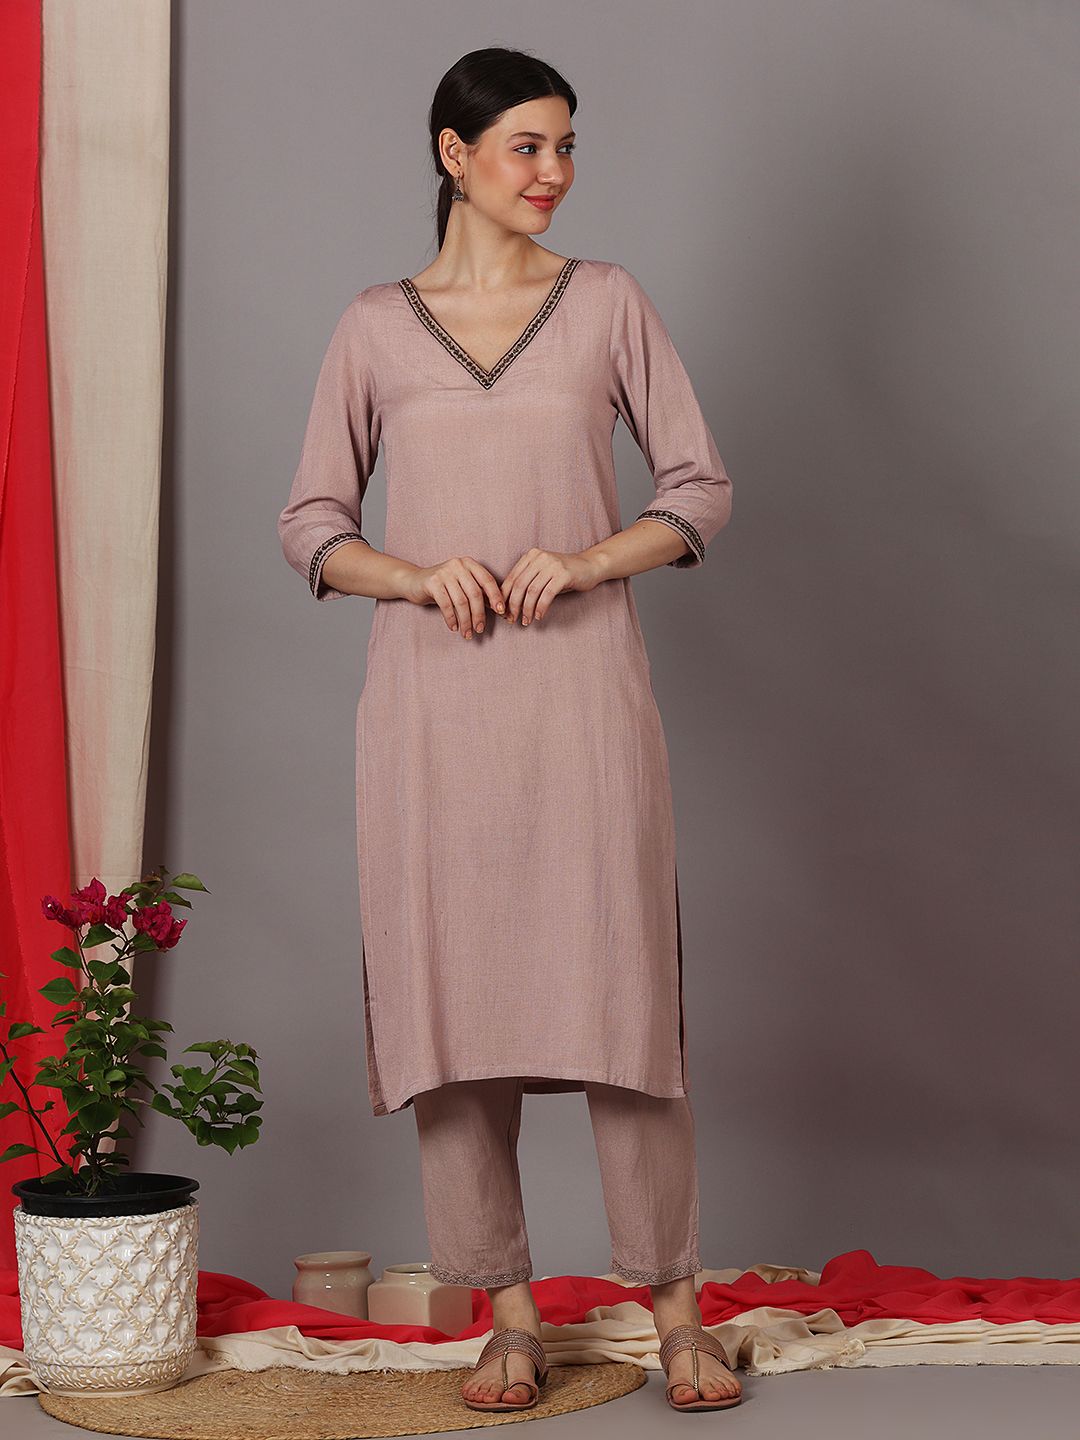 Kurti Neck Designs That You Should Certainly Get Stitched!